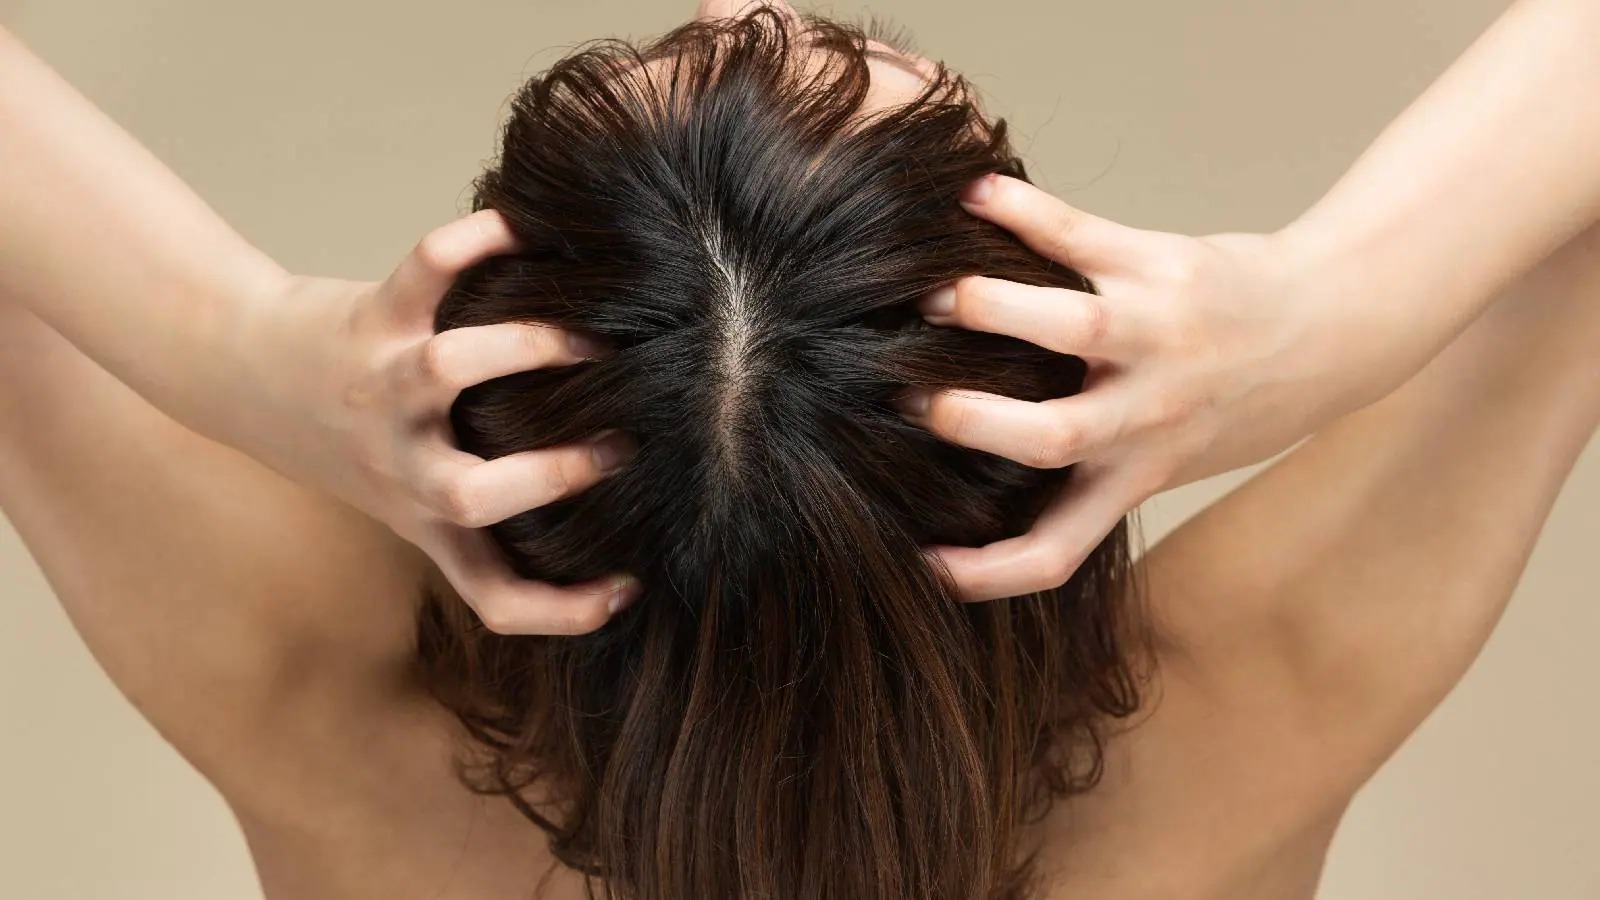 dirty hair scalp grows faster or slower